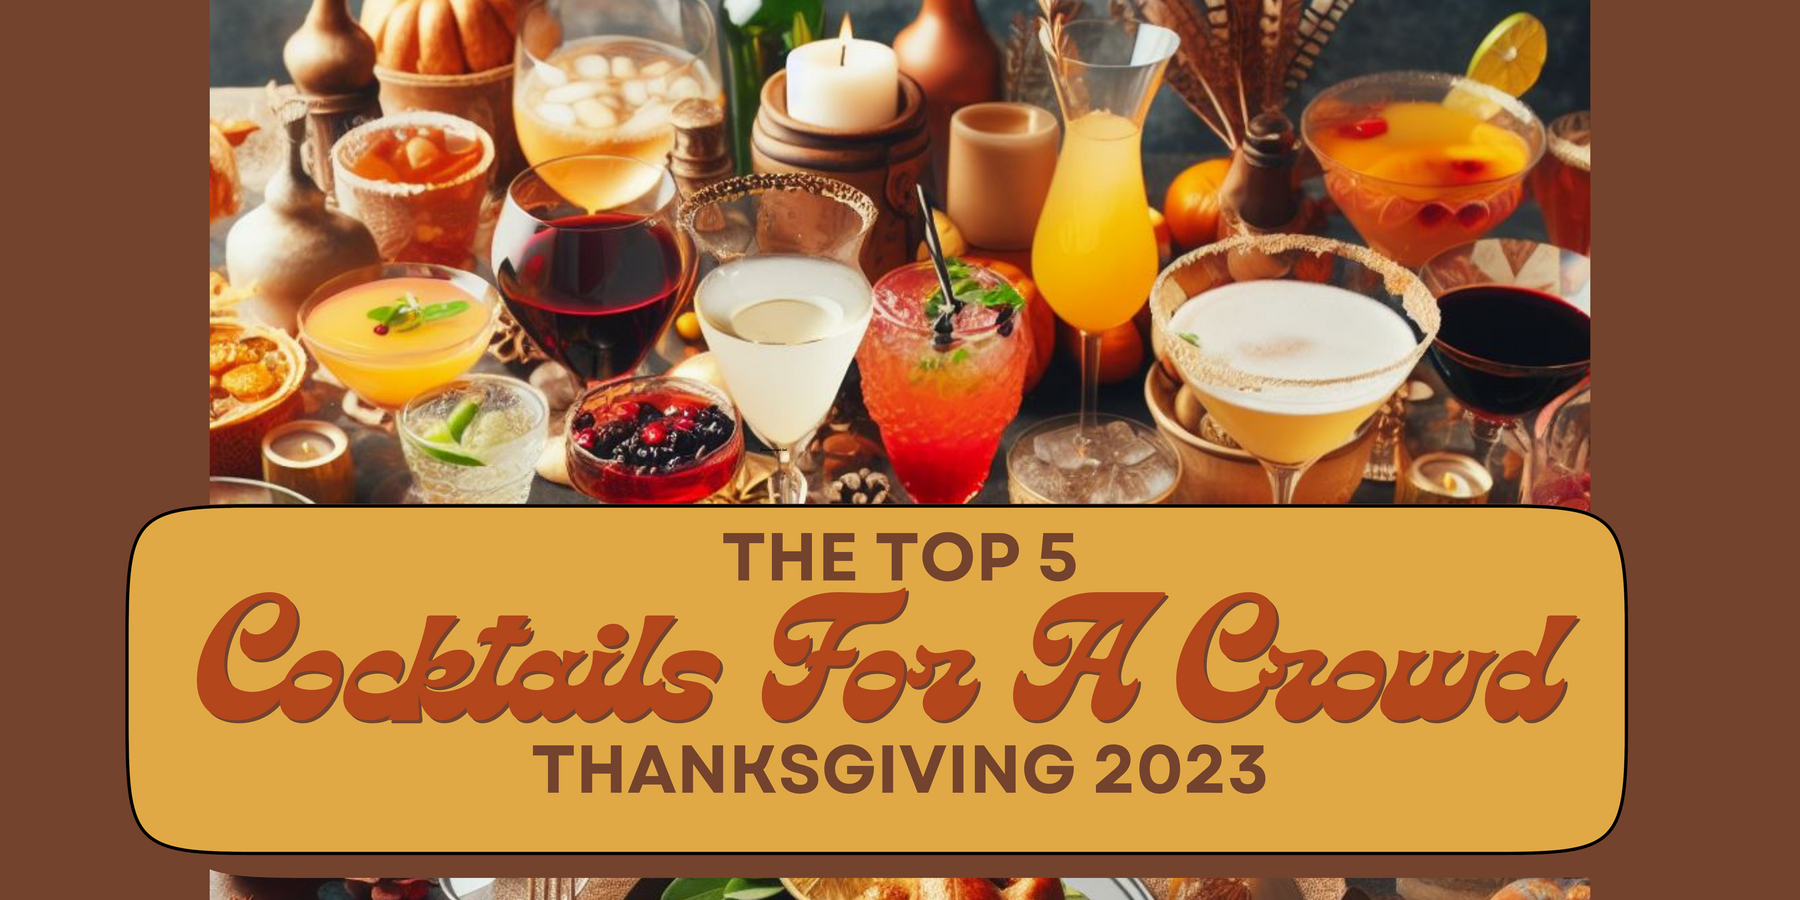 The Top 5 Thanksgiving Cocktails For A Crowd